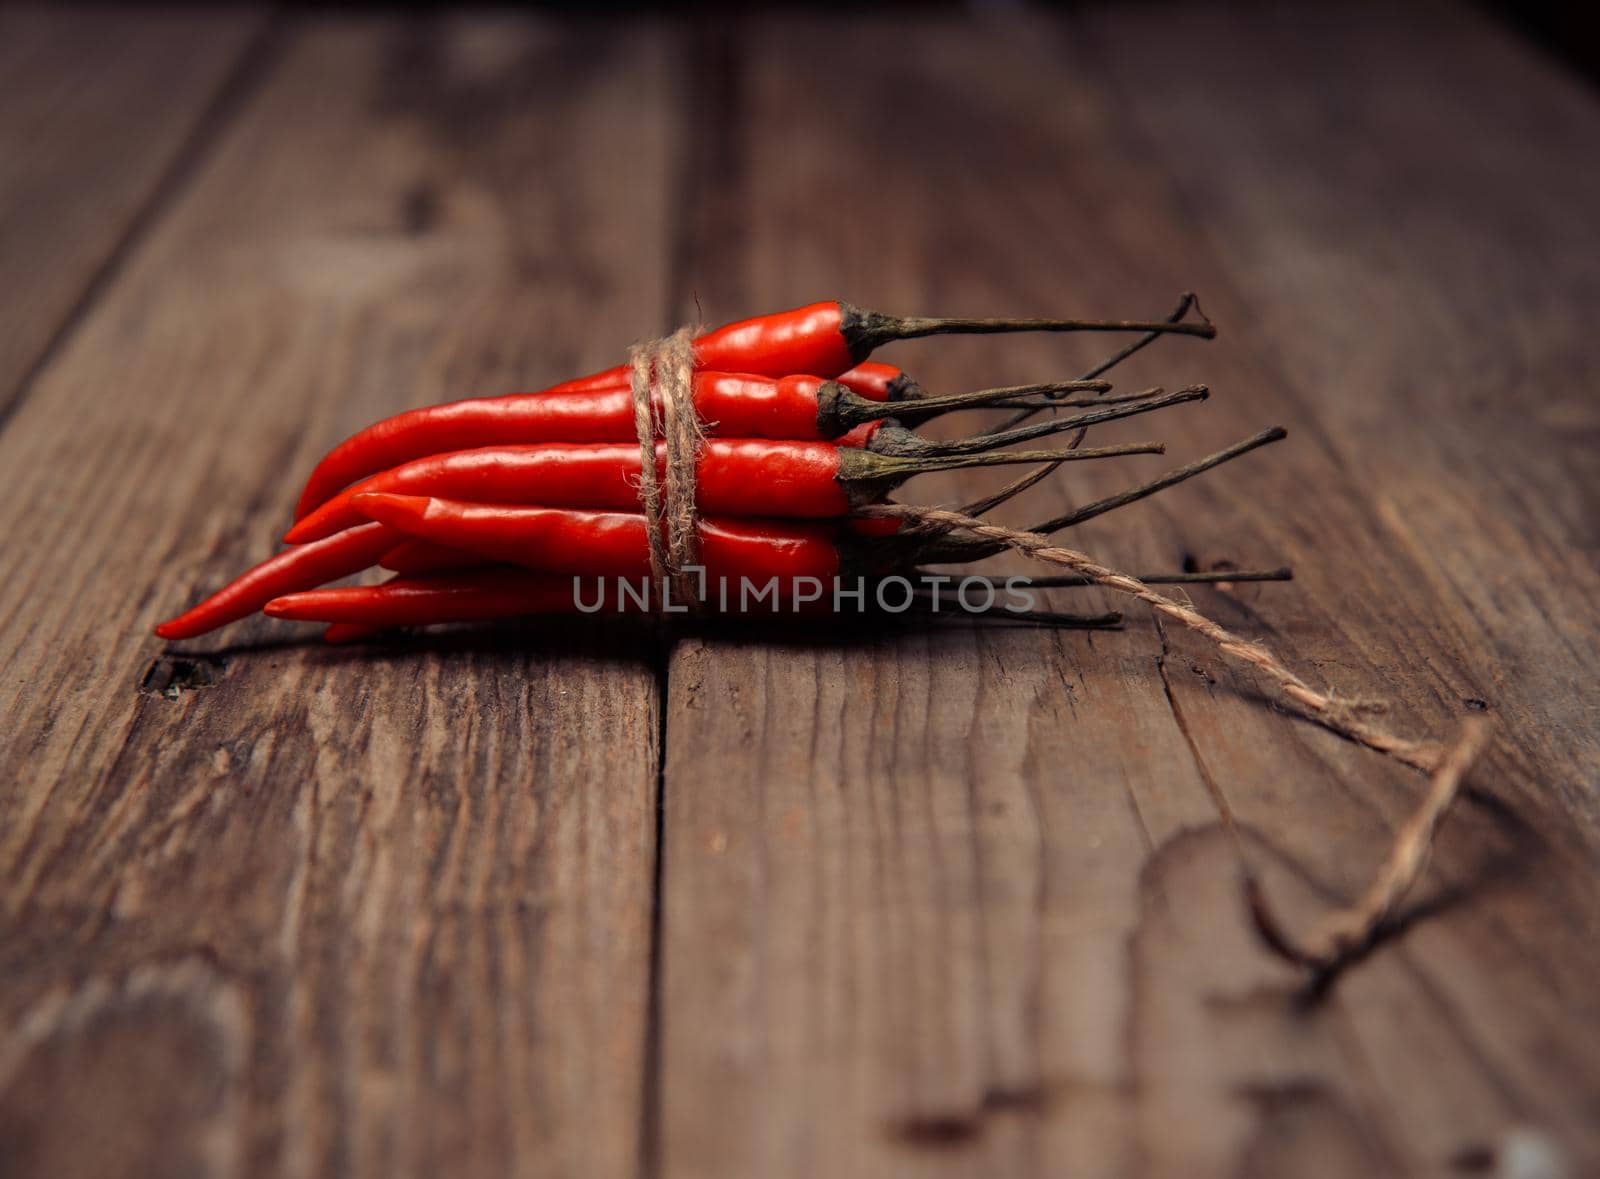 Red chili peppers in a bunch on a wooden table, focus on peppers